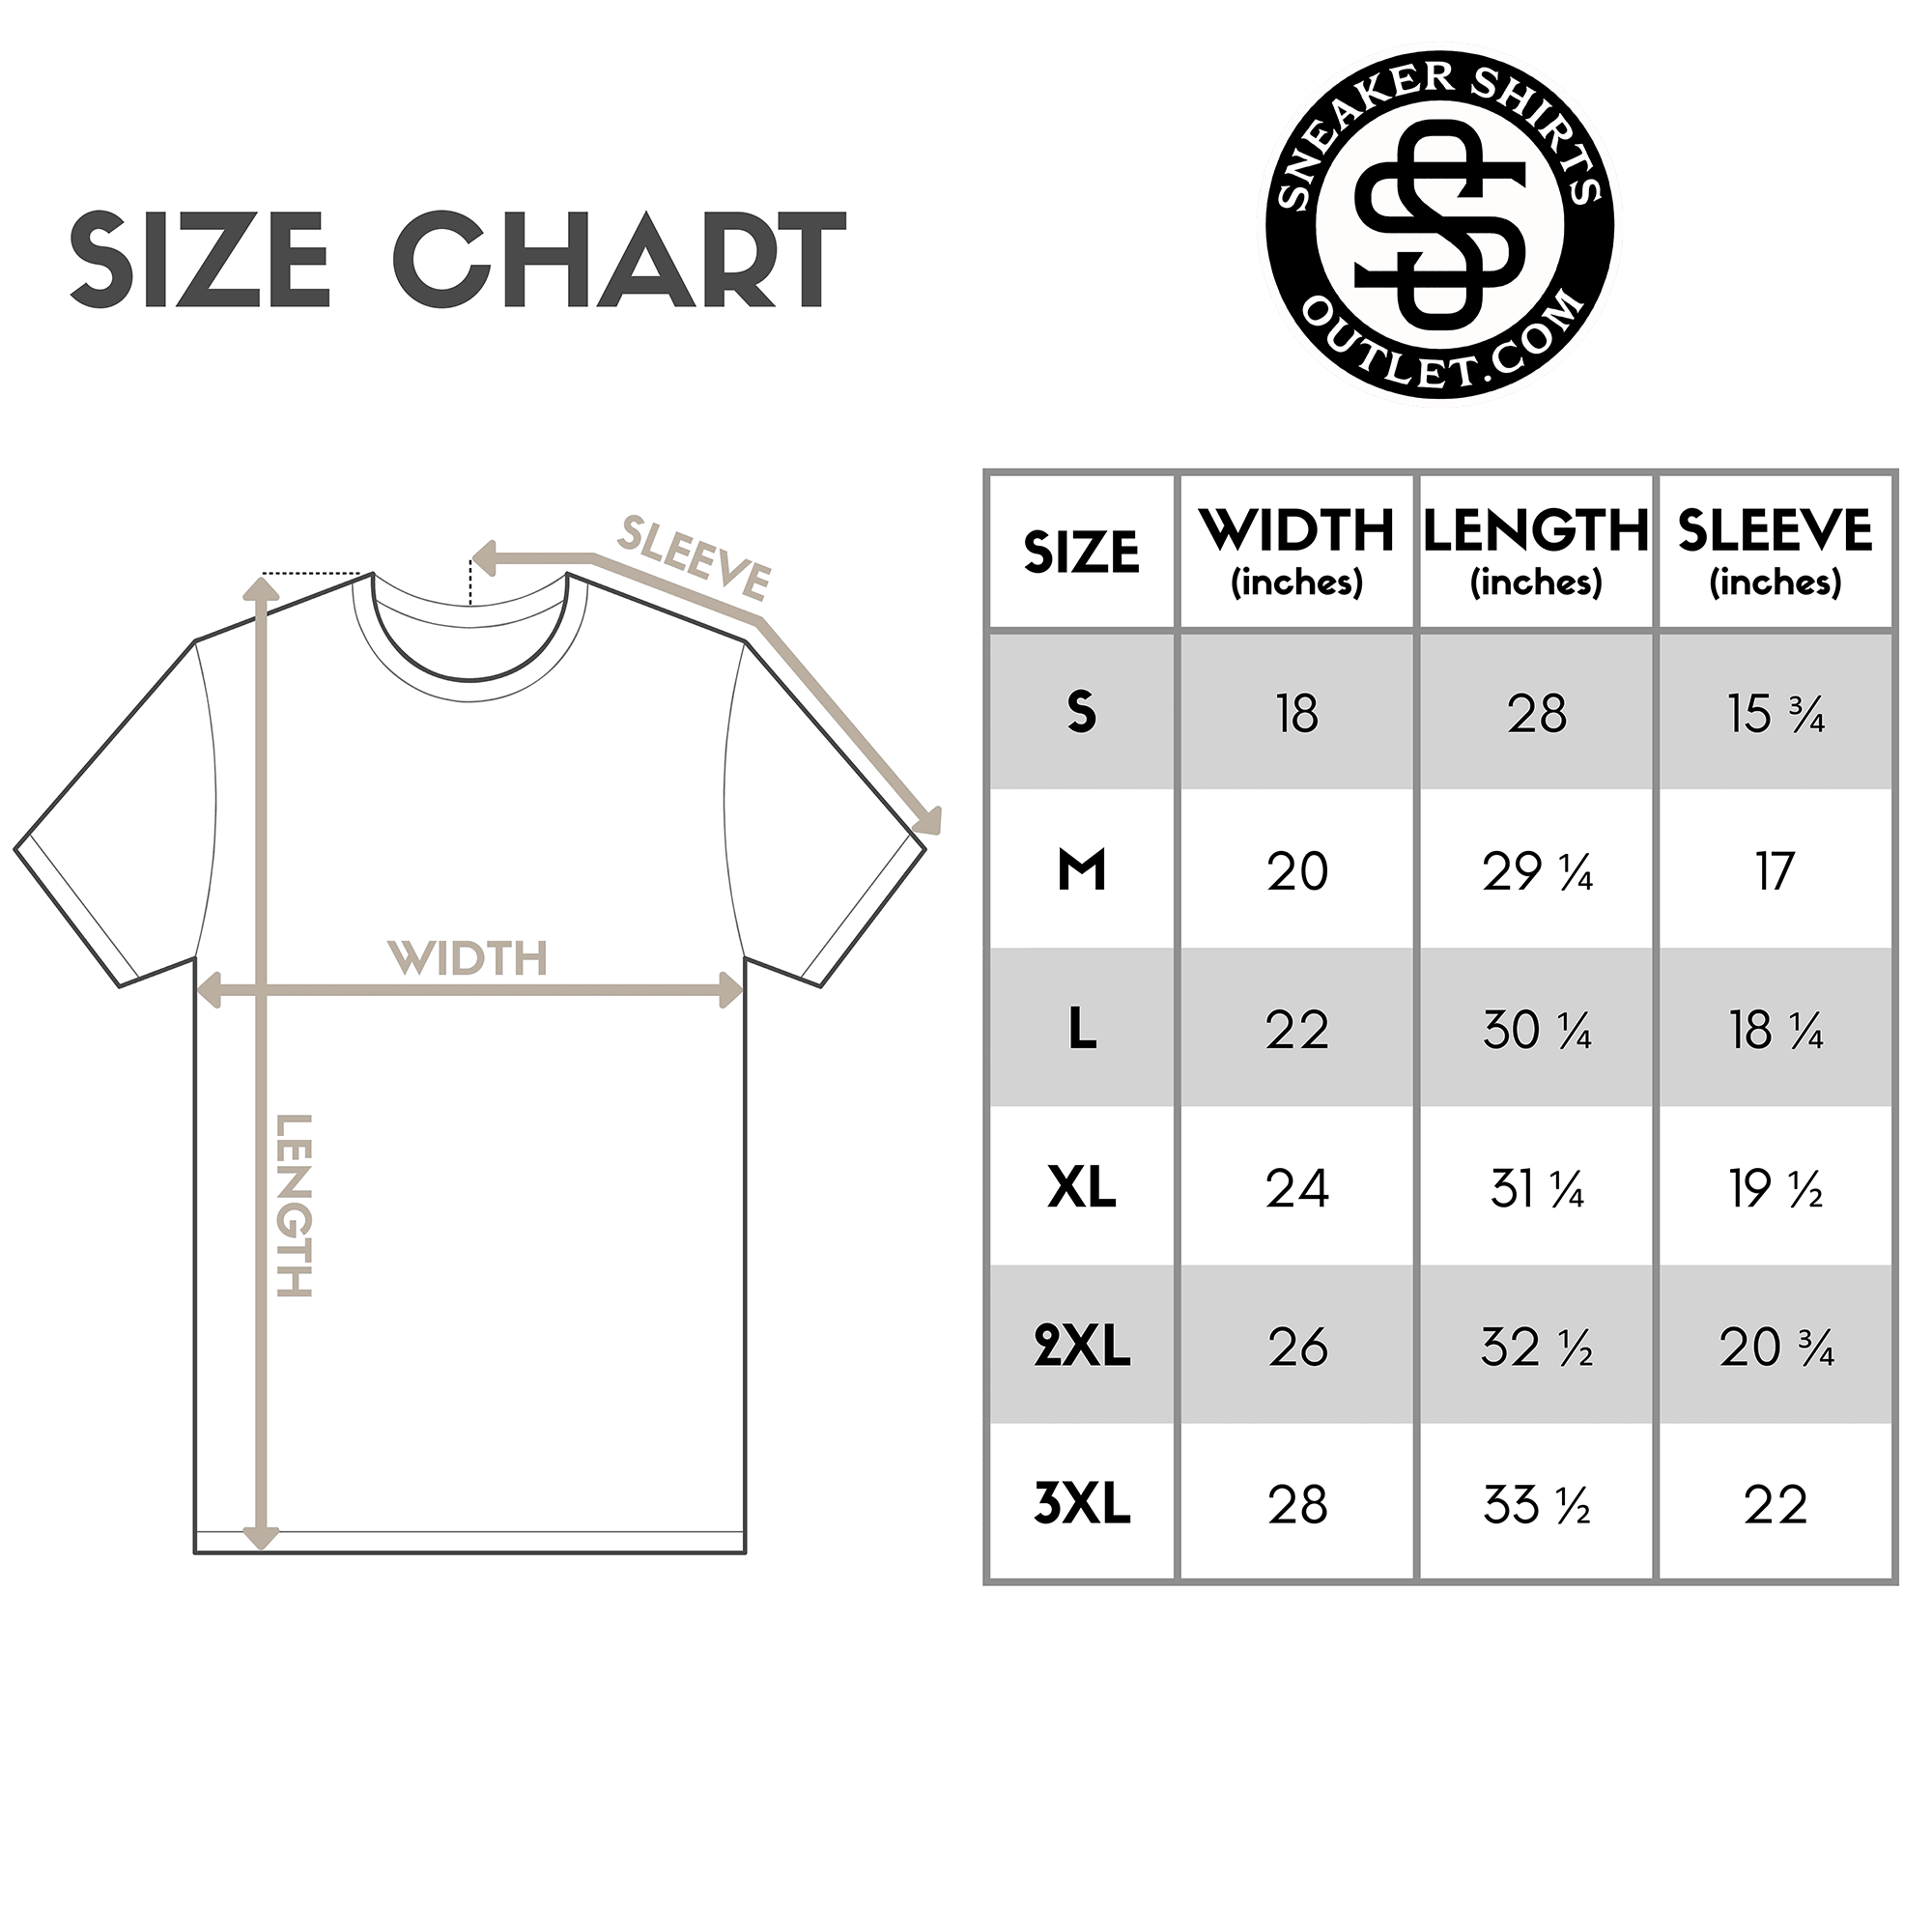 Time is Money Shirt size chart photo